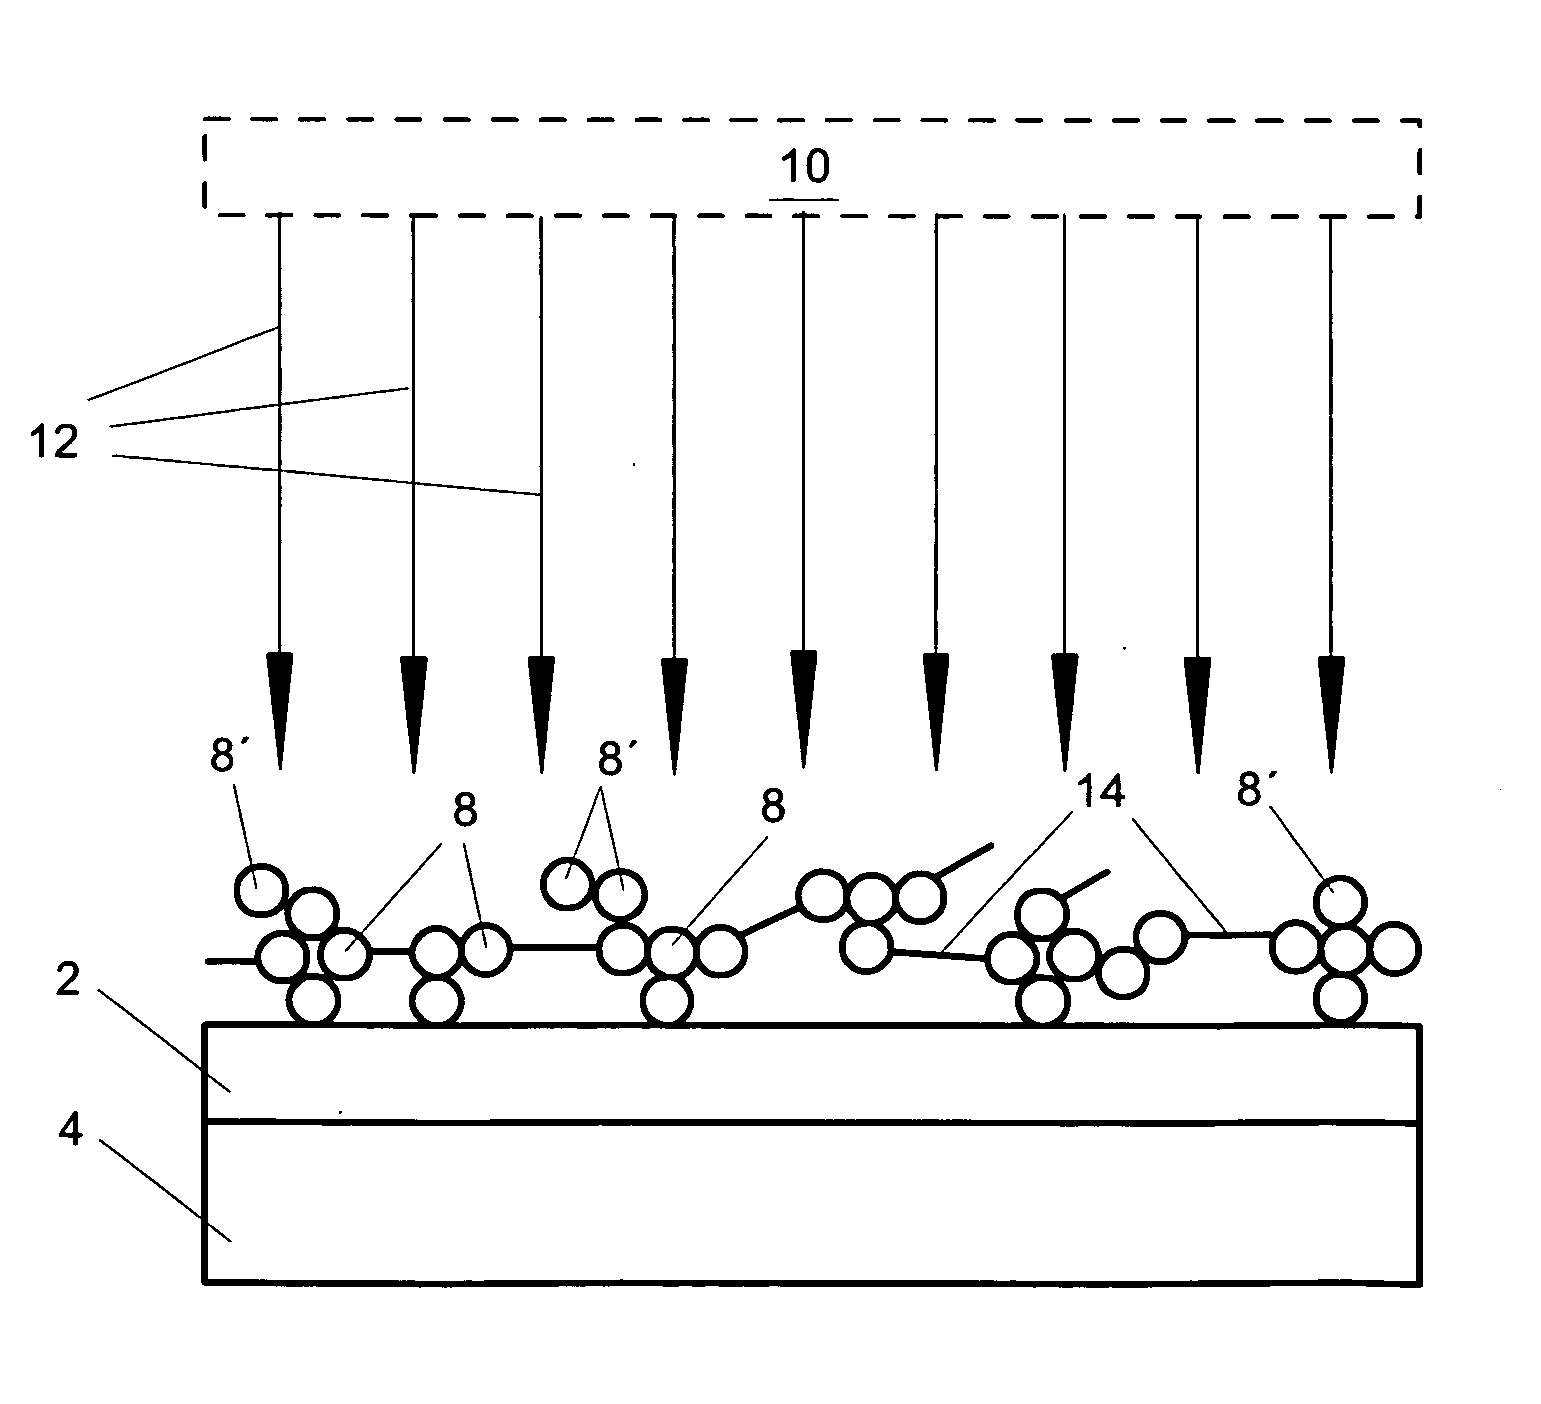 Electronic device having an electrode with enhanced injection properties